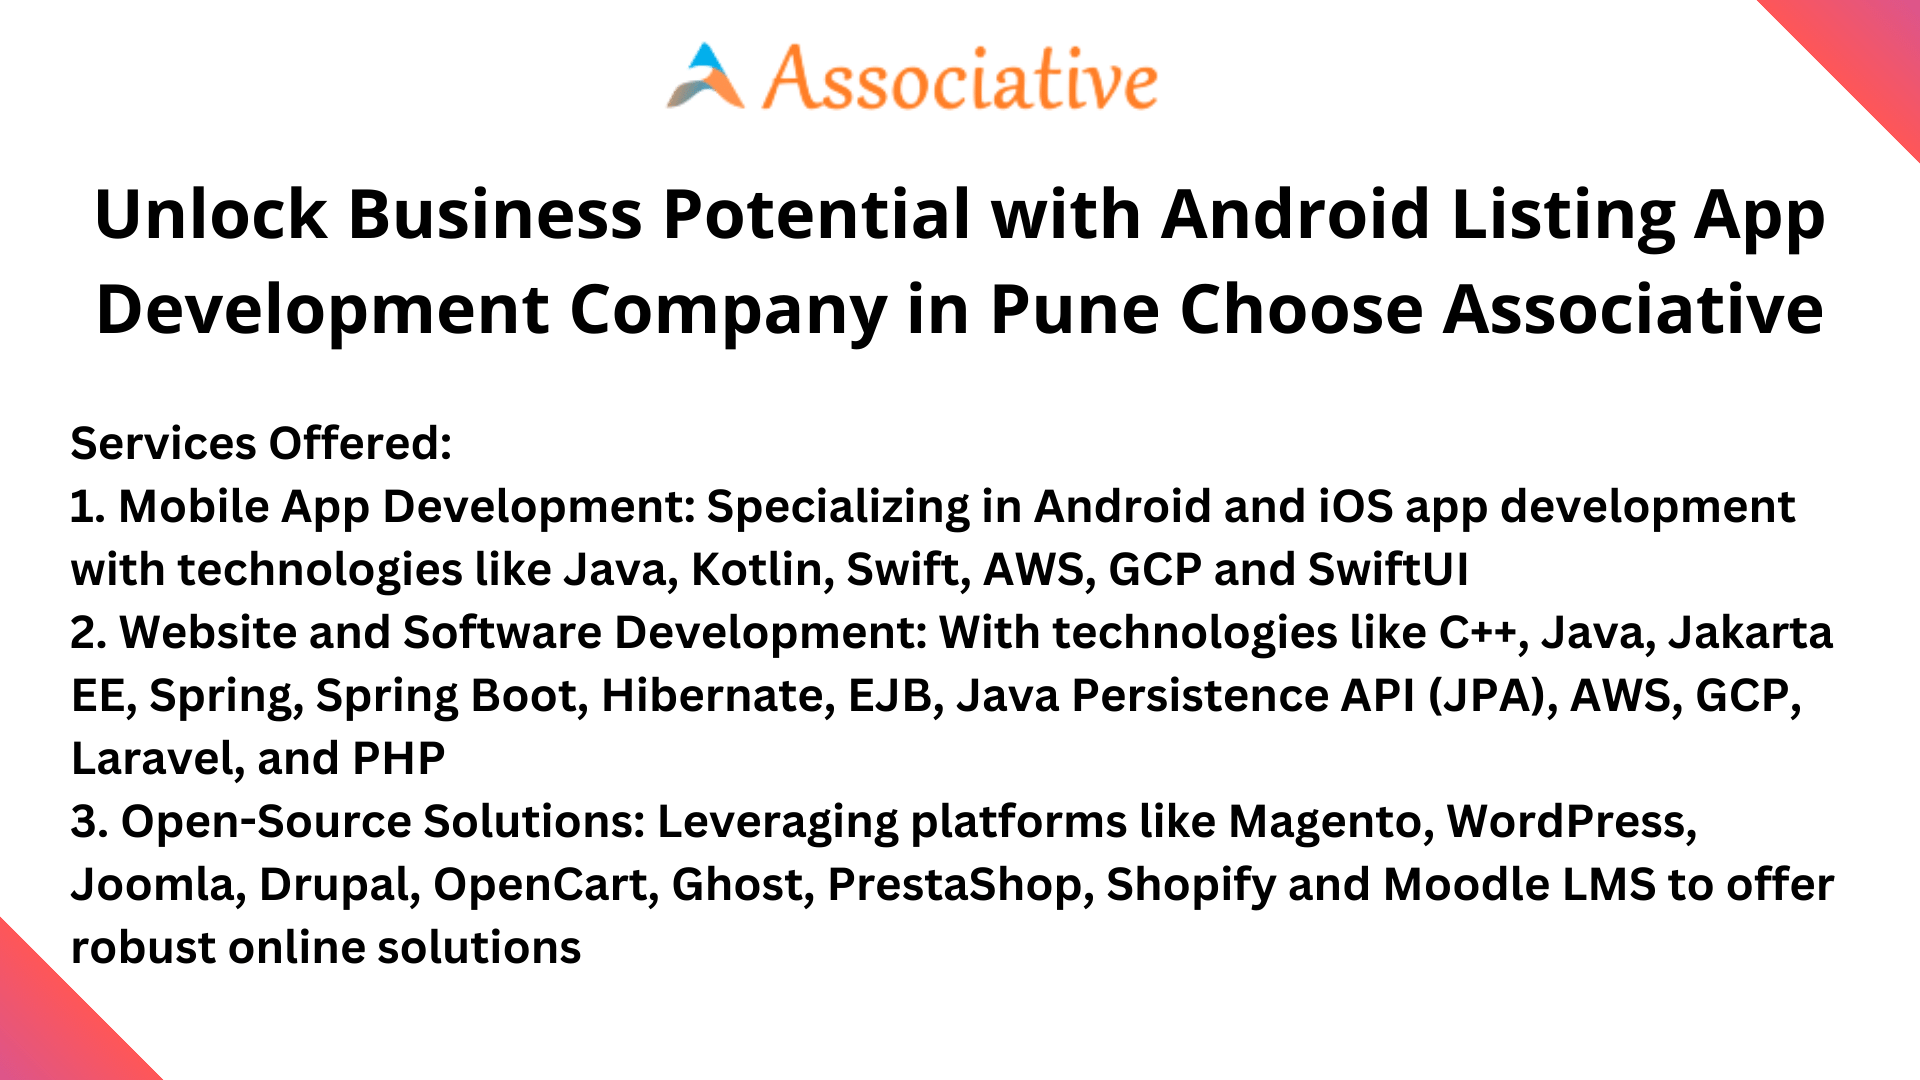 Unlock Business Potential with Android Listing App Development Company in Pune Choose Associative